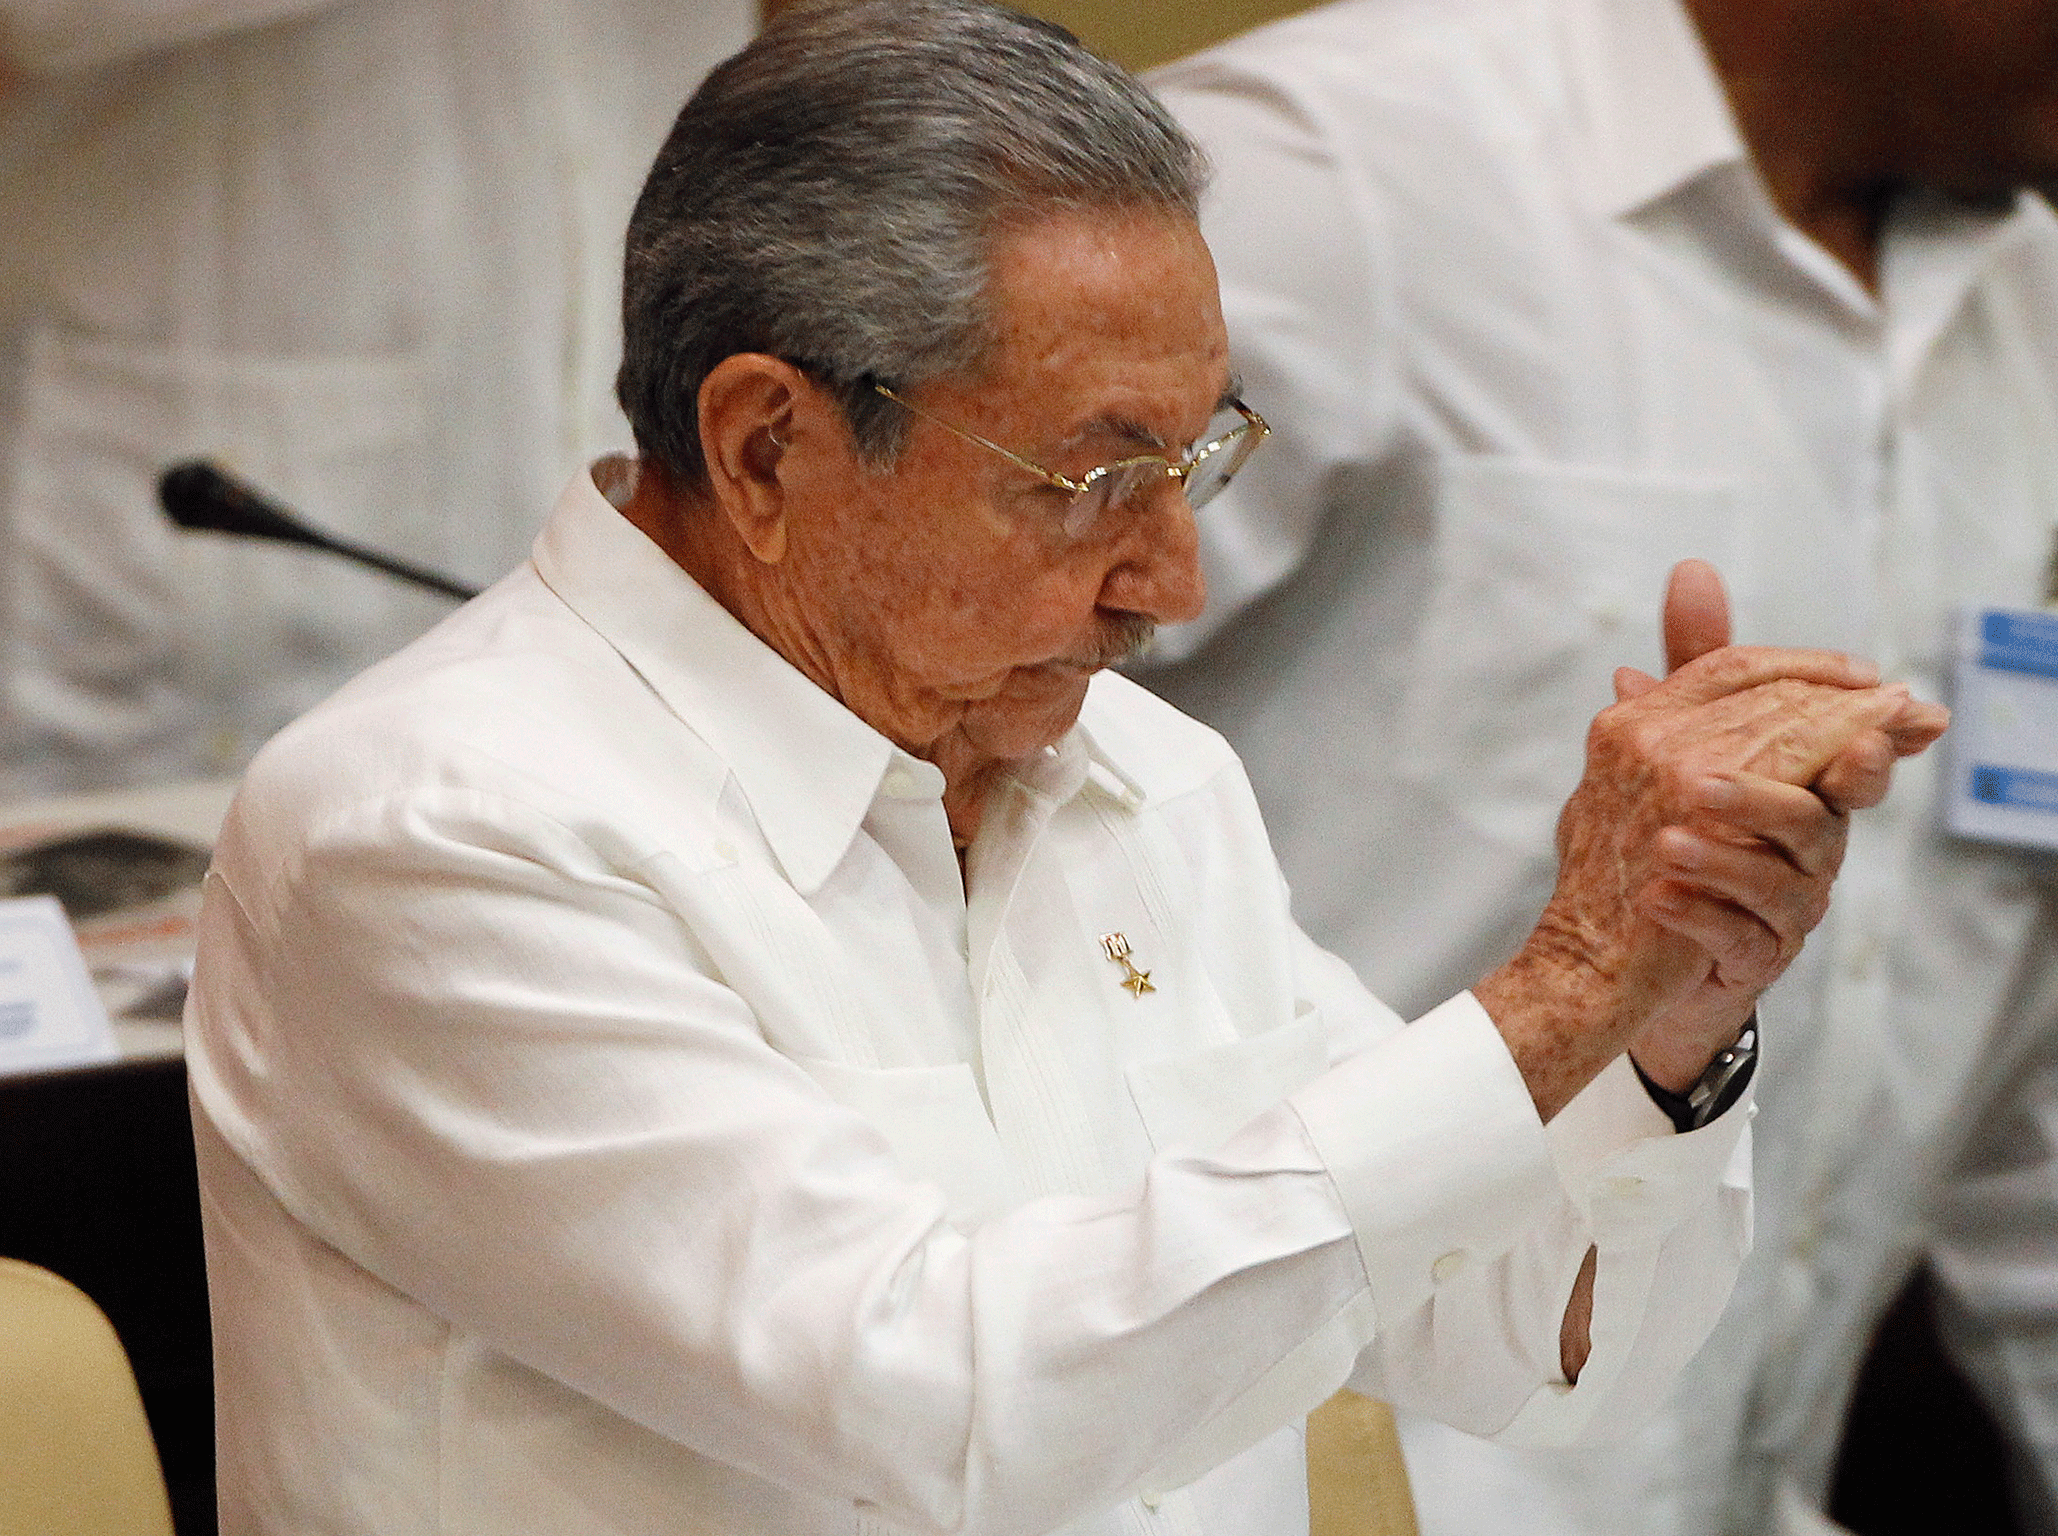 Raul Castro speaking in Cuba's National Assembly on Saturday